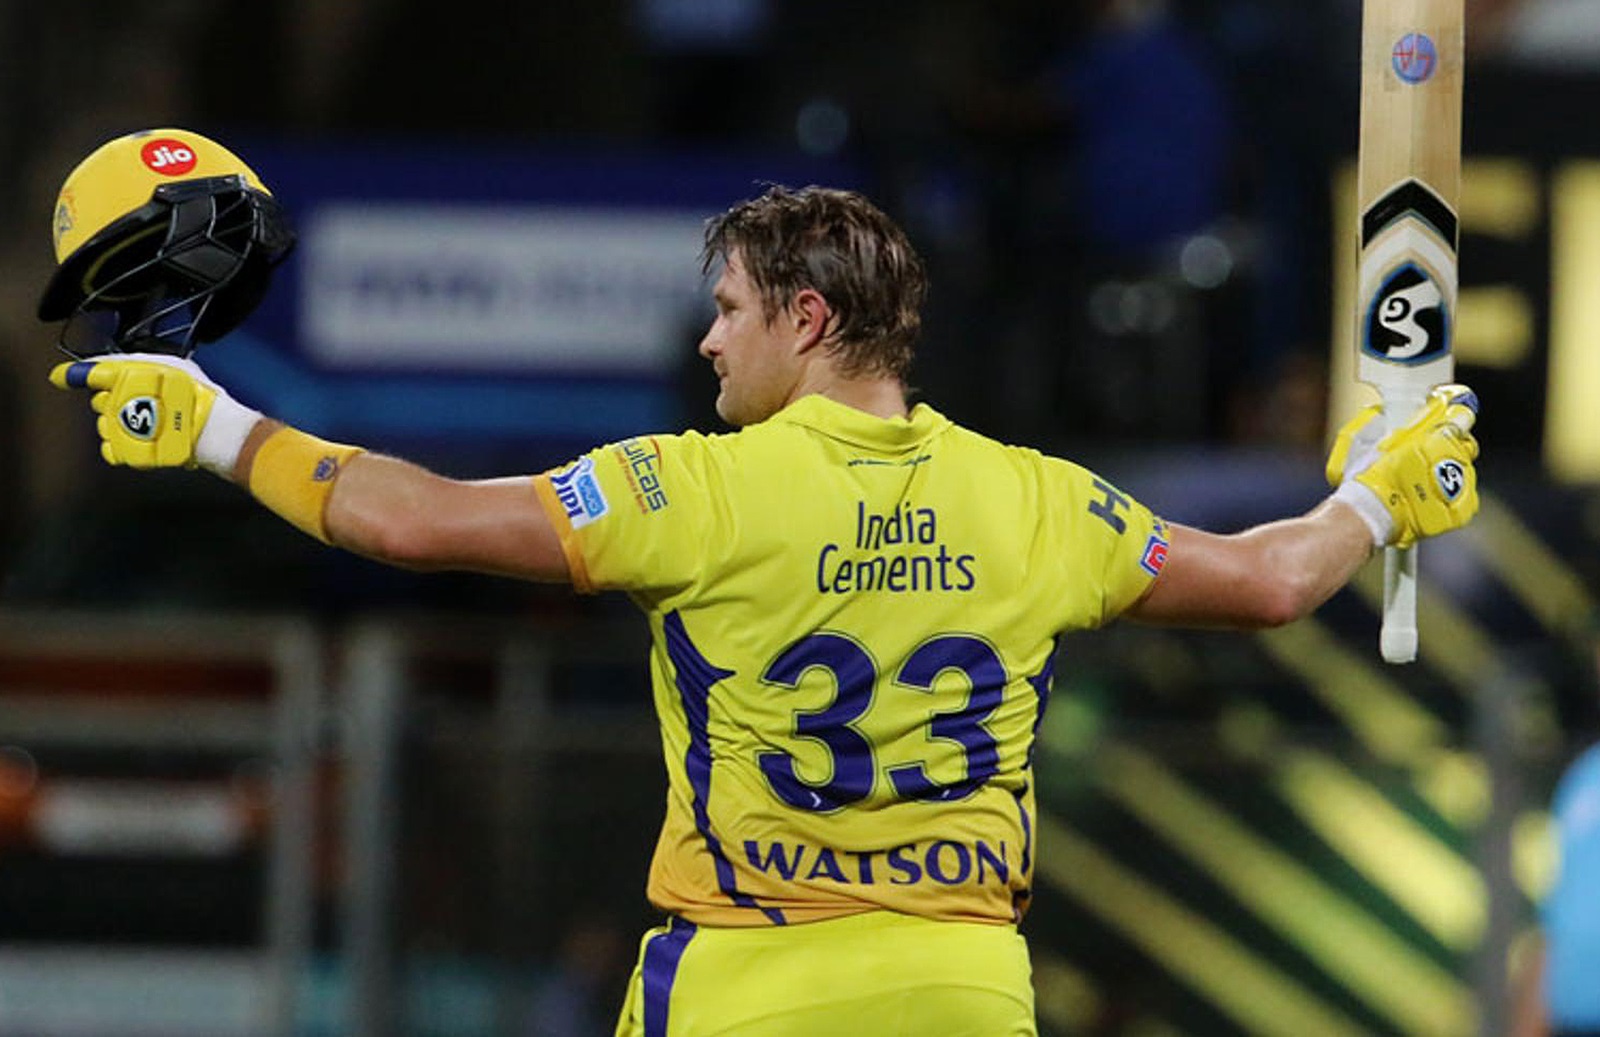 Shane Watson was in great form with the bat in IPL.